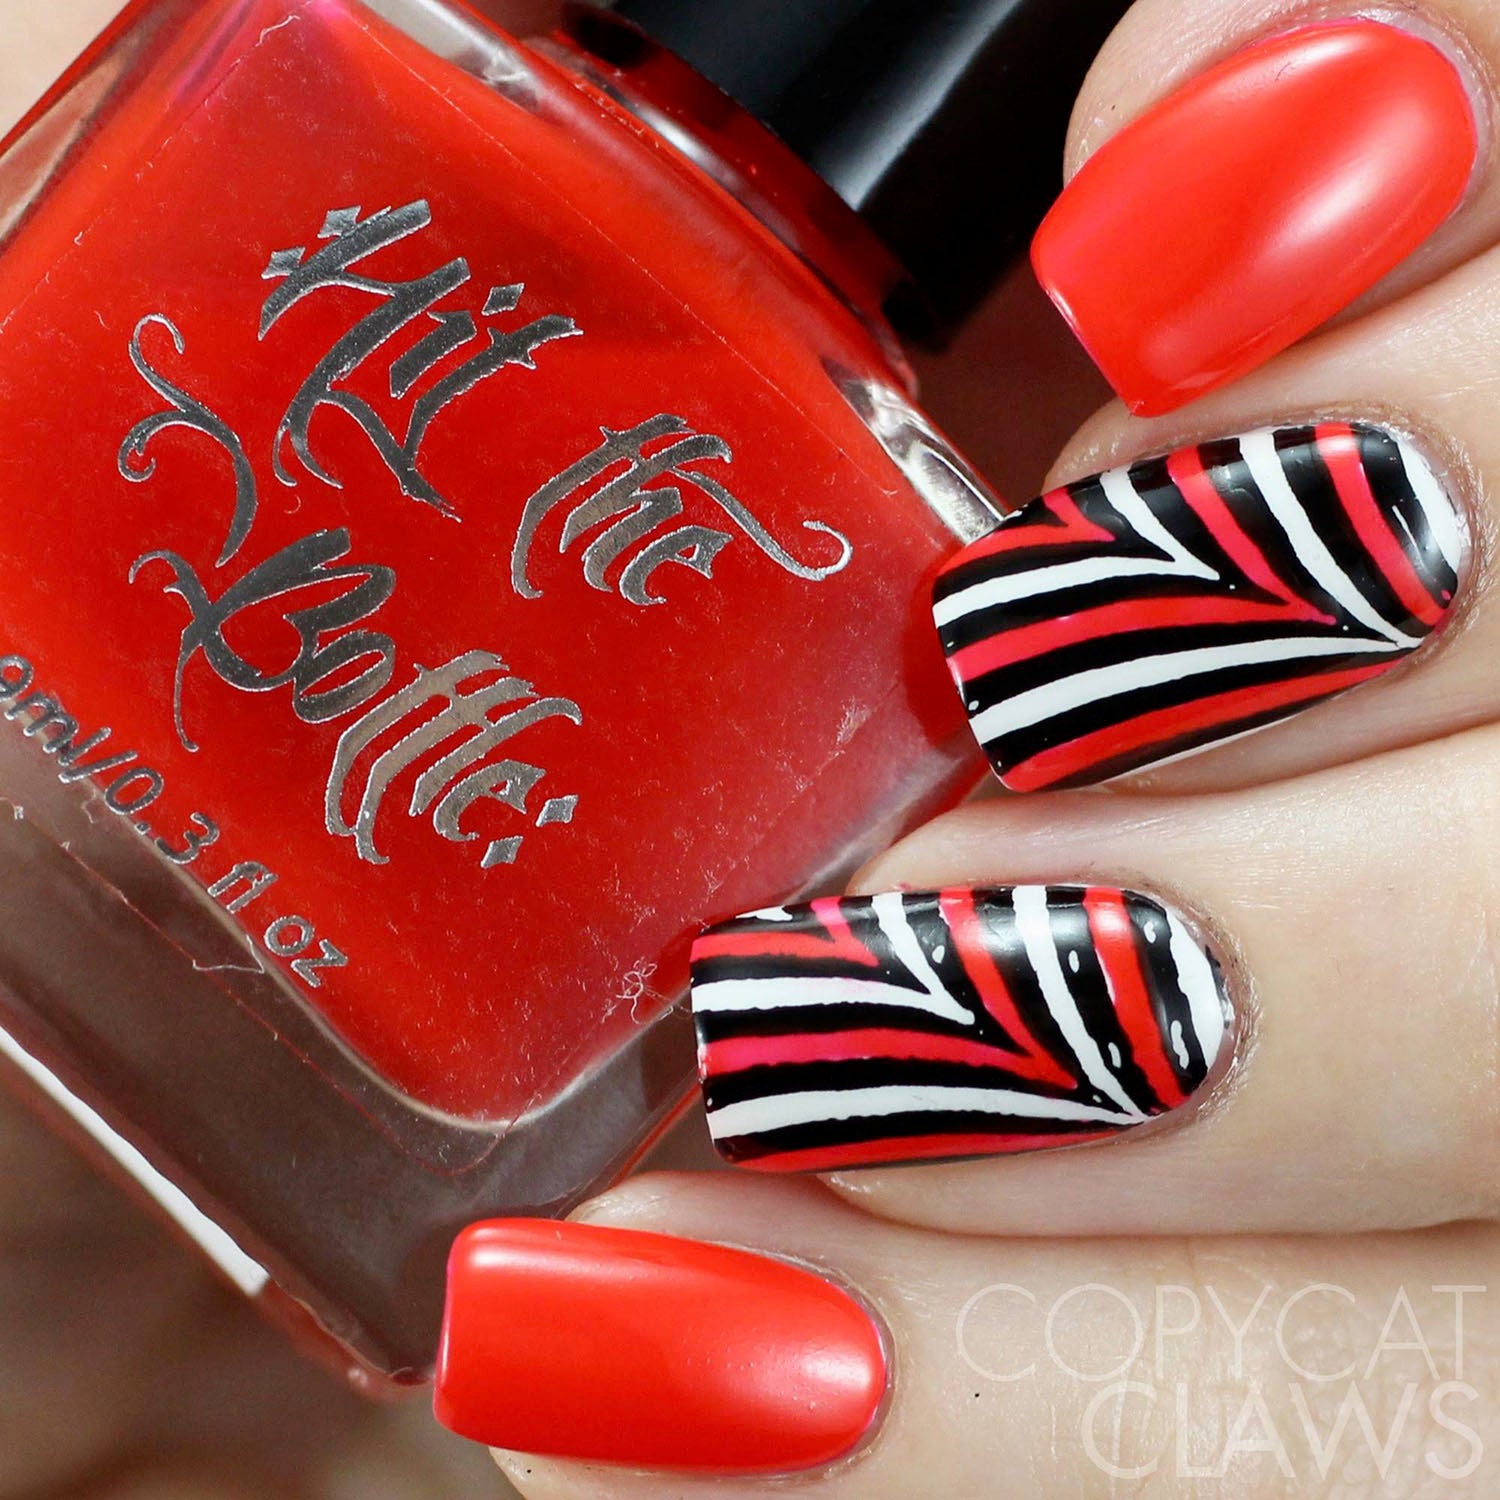 hit the bottle red jelly nail polish